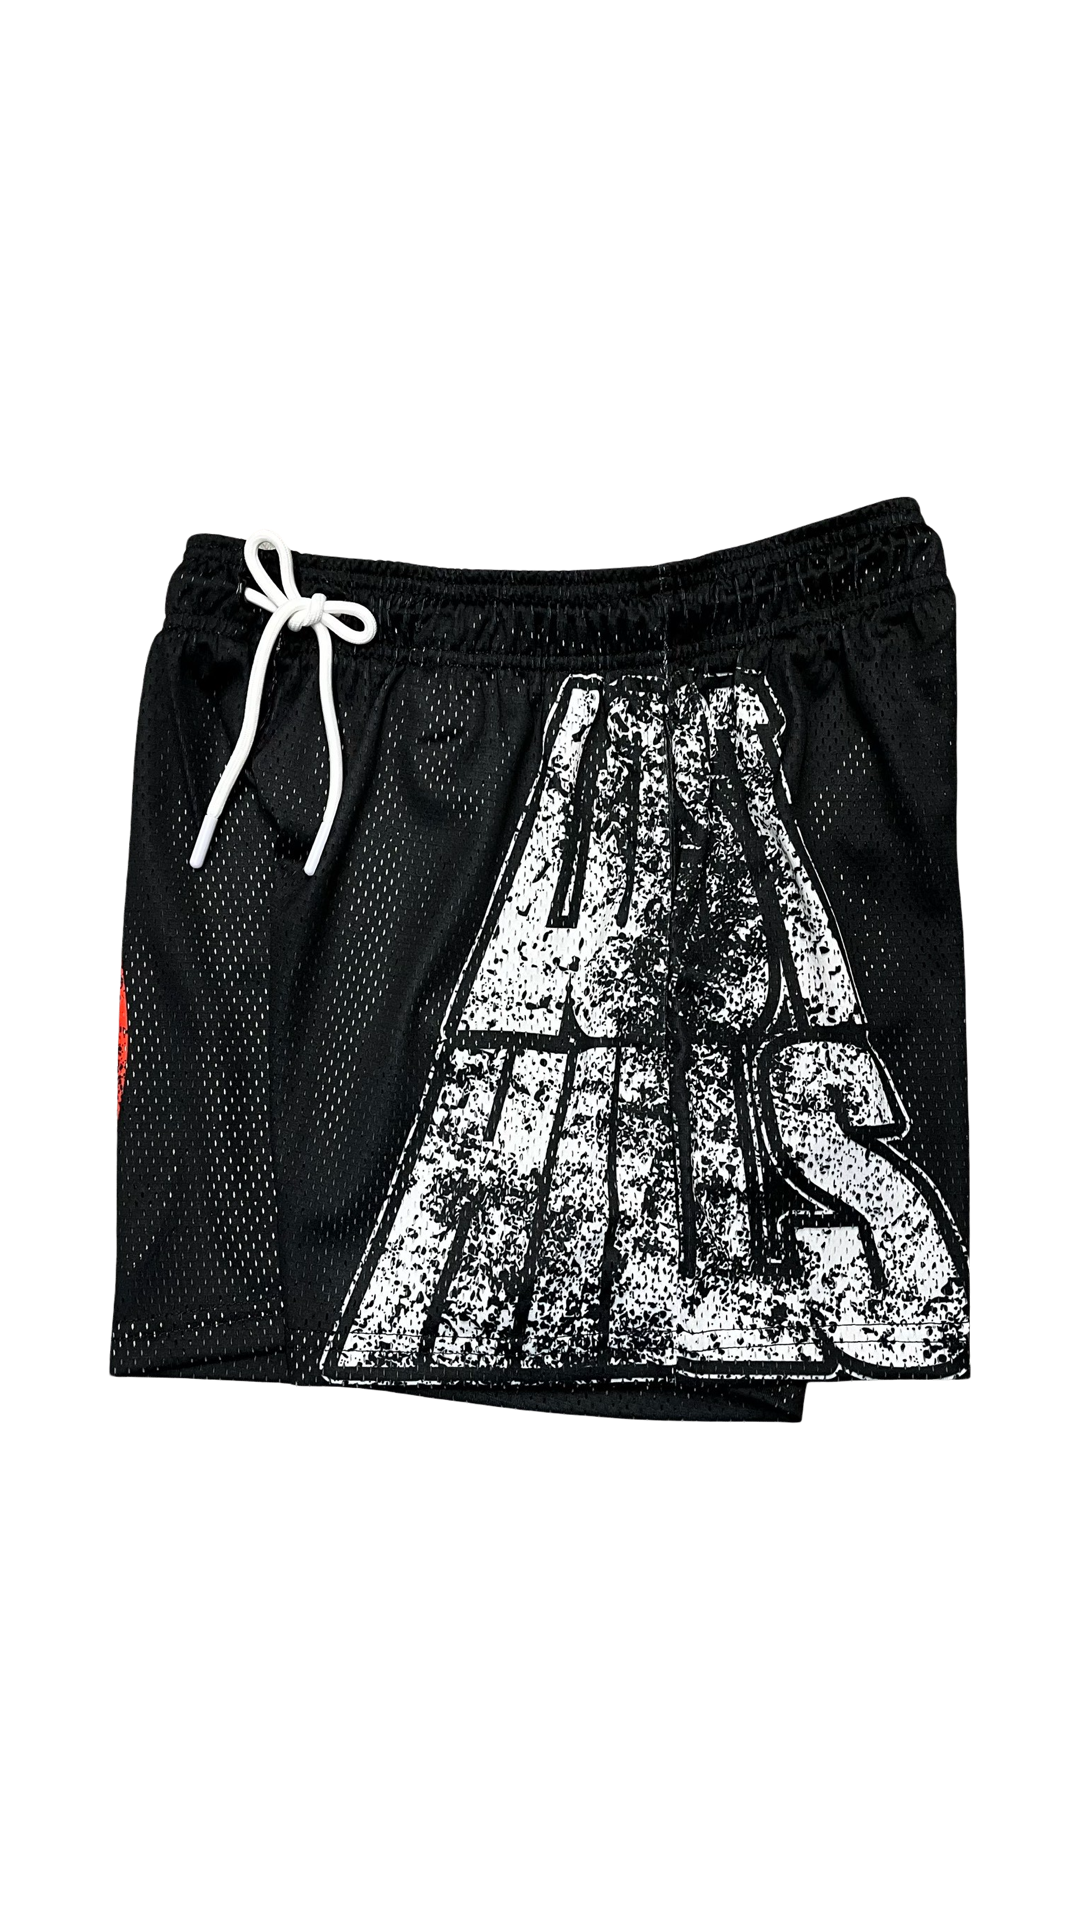 Lost hills “side patch” shorts